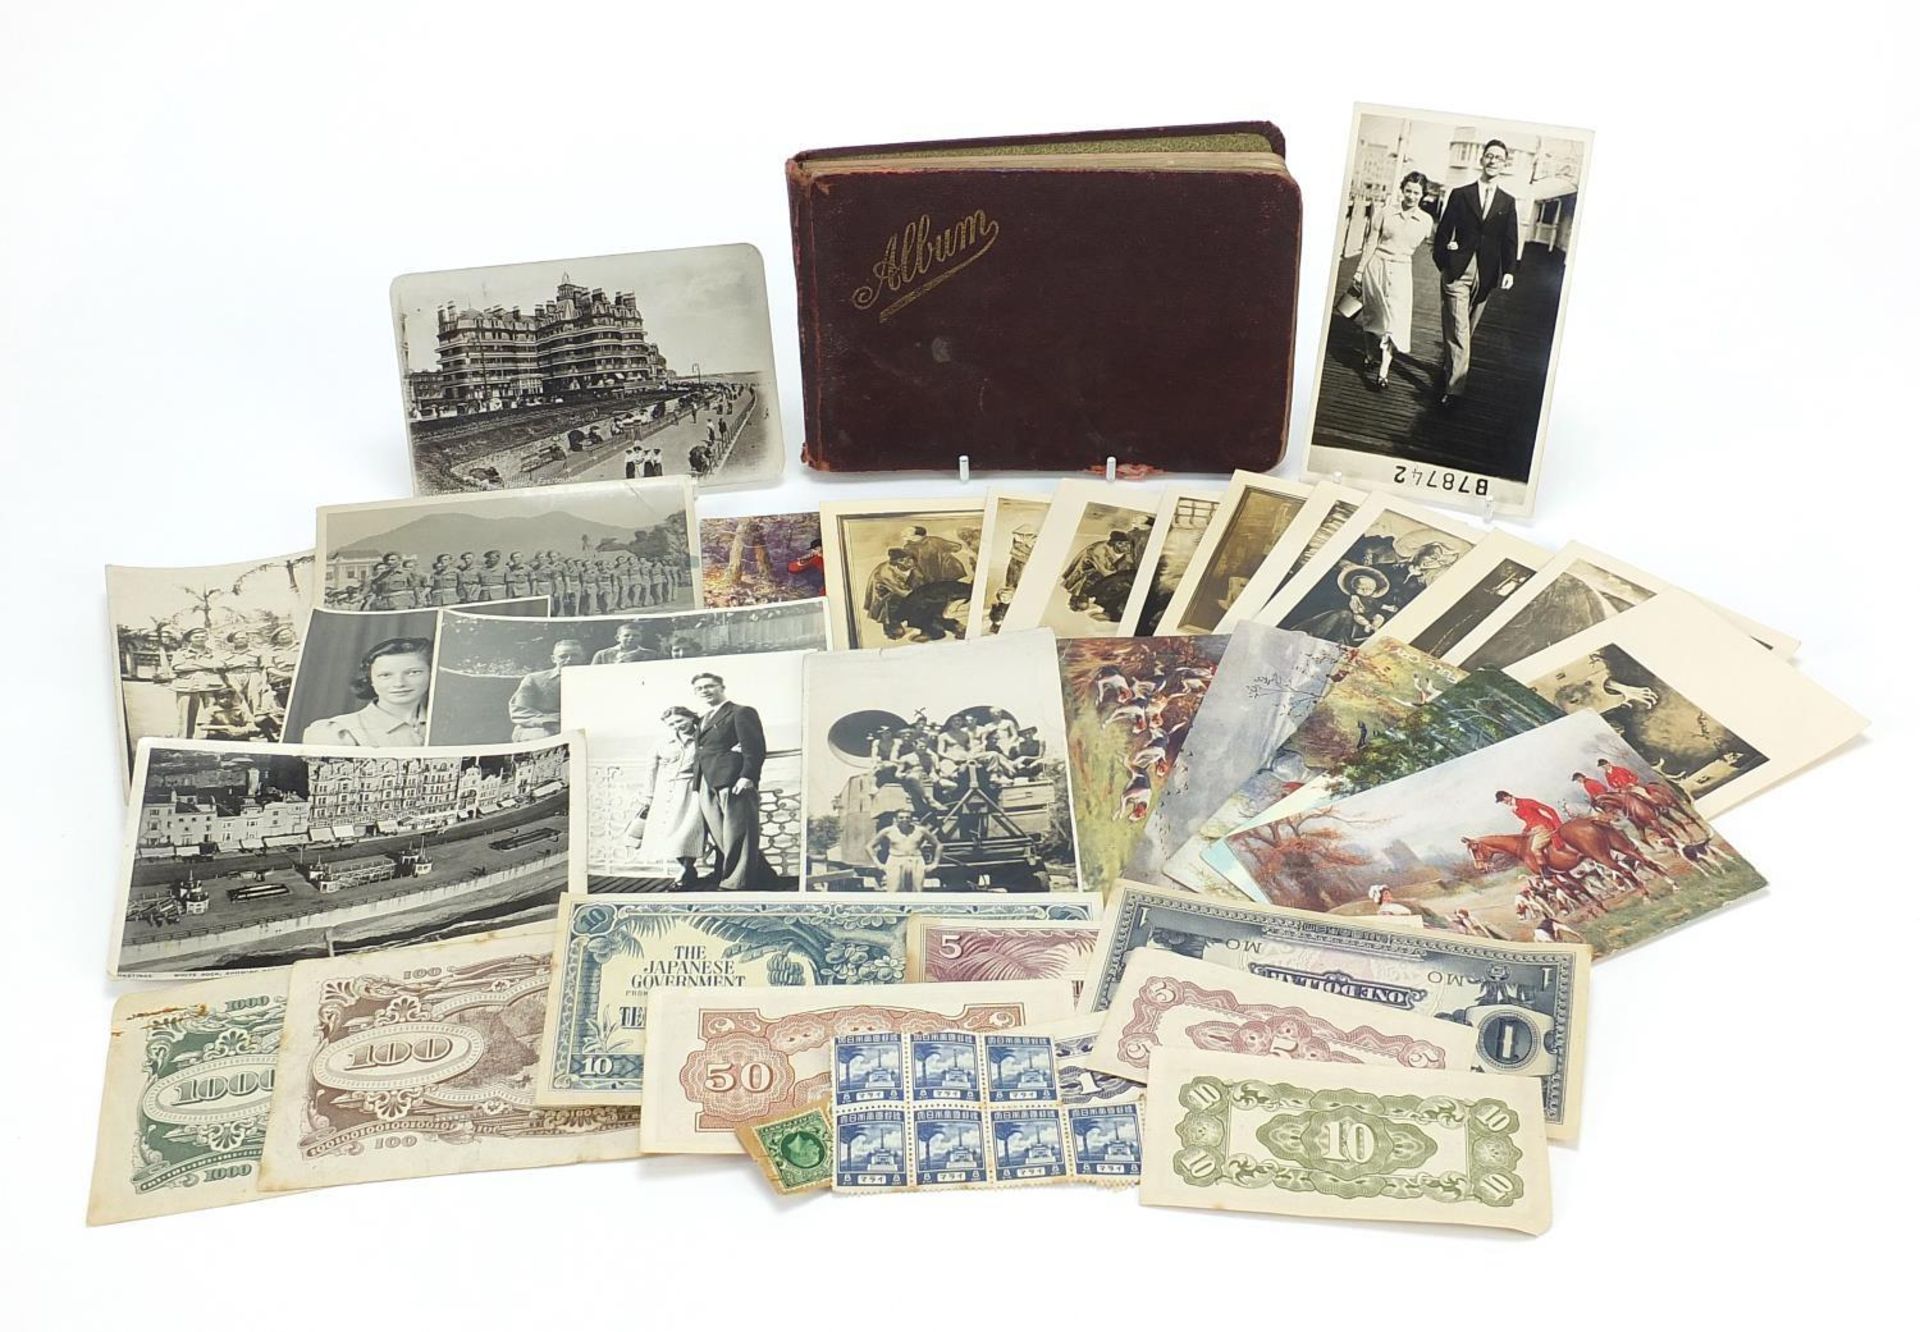 Early 20th century and later ephemera including postcards, banknotes and annotation album with